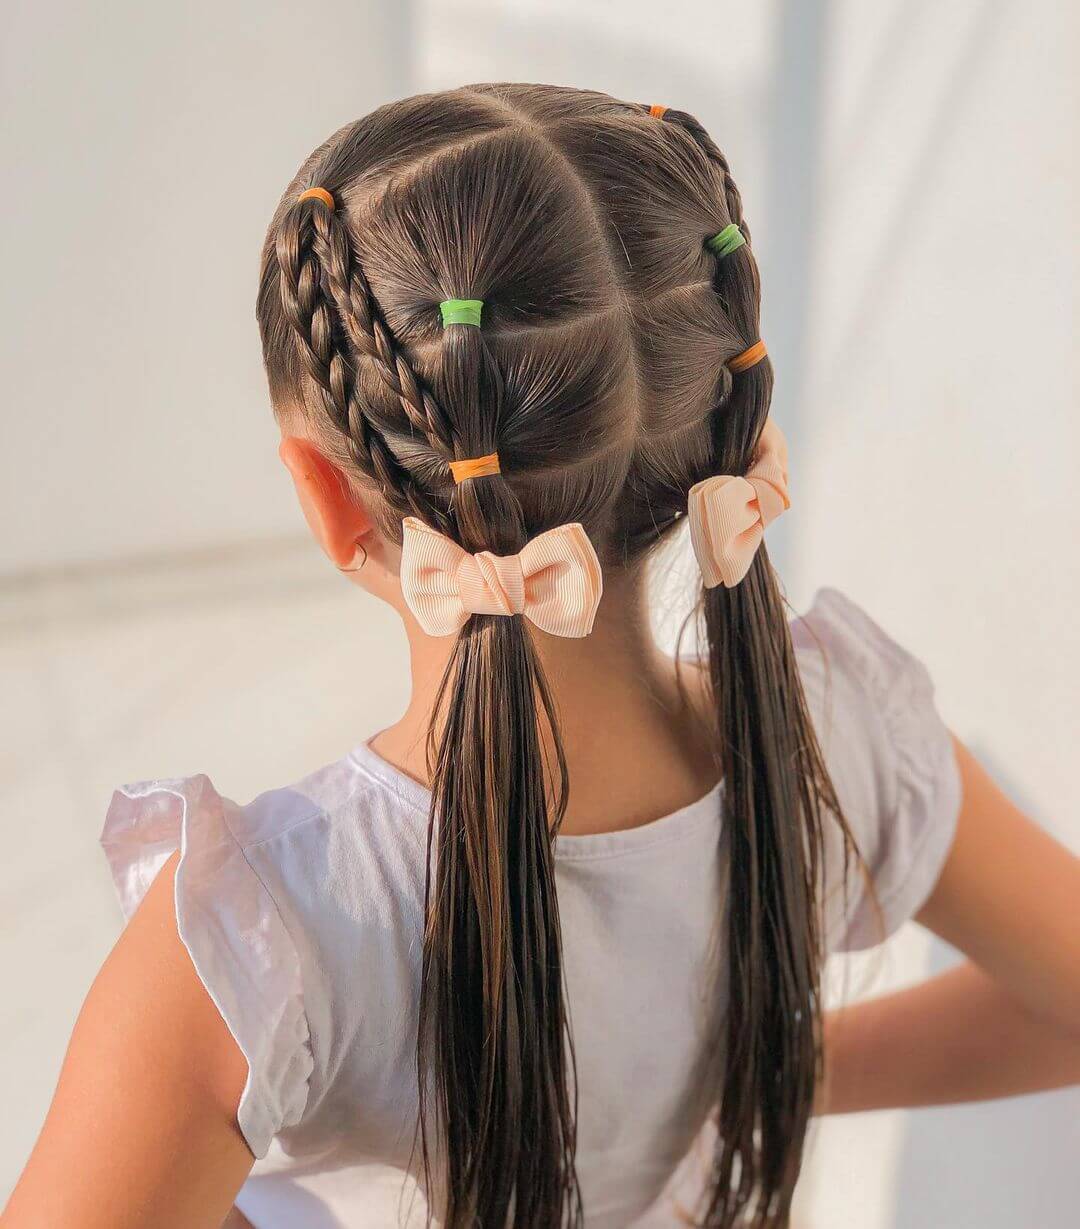 Braids for kids with long hair Thin braided ponytails for kids